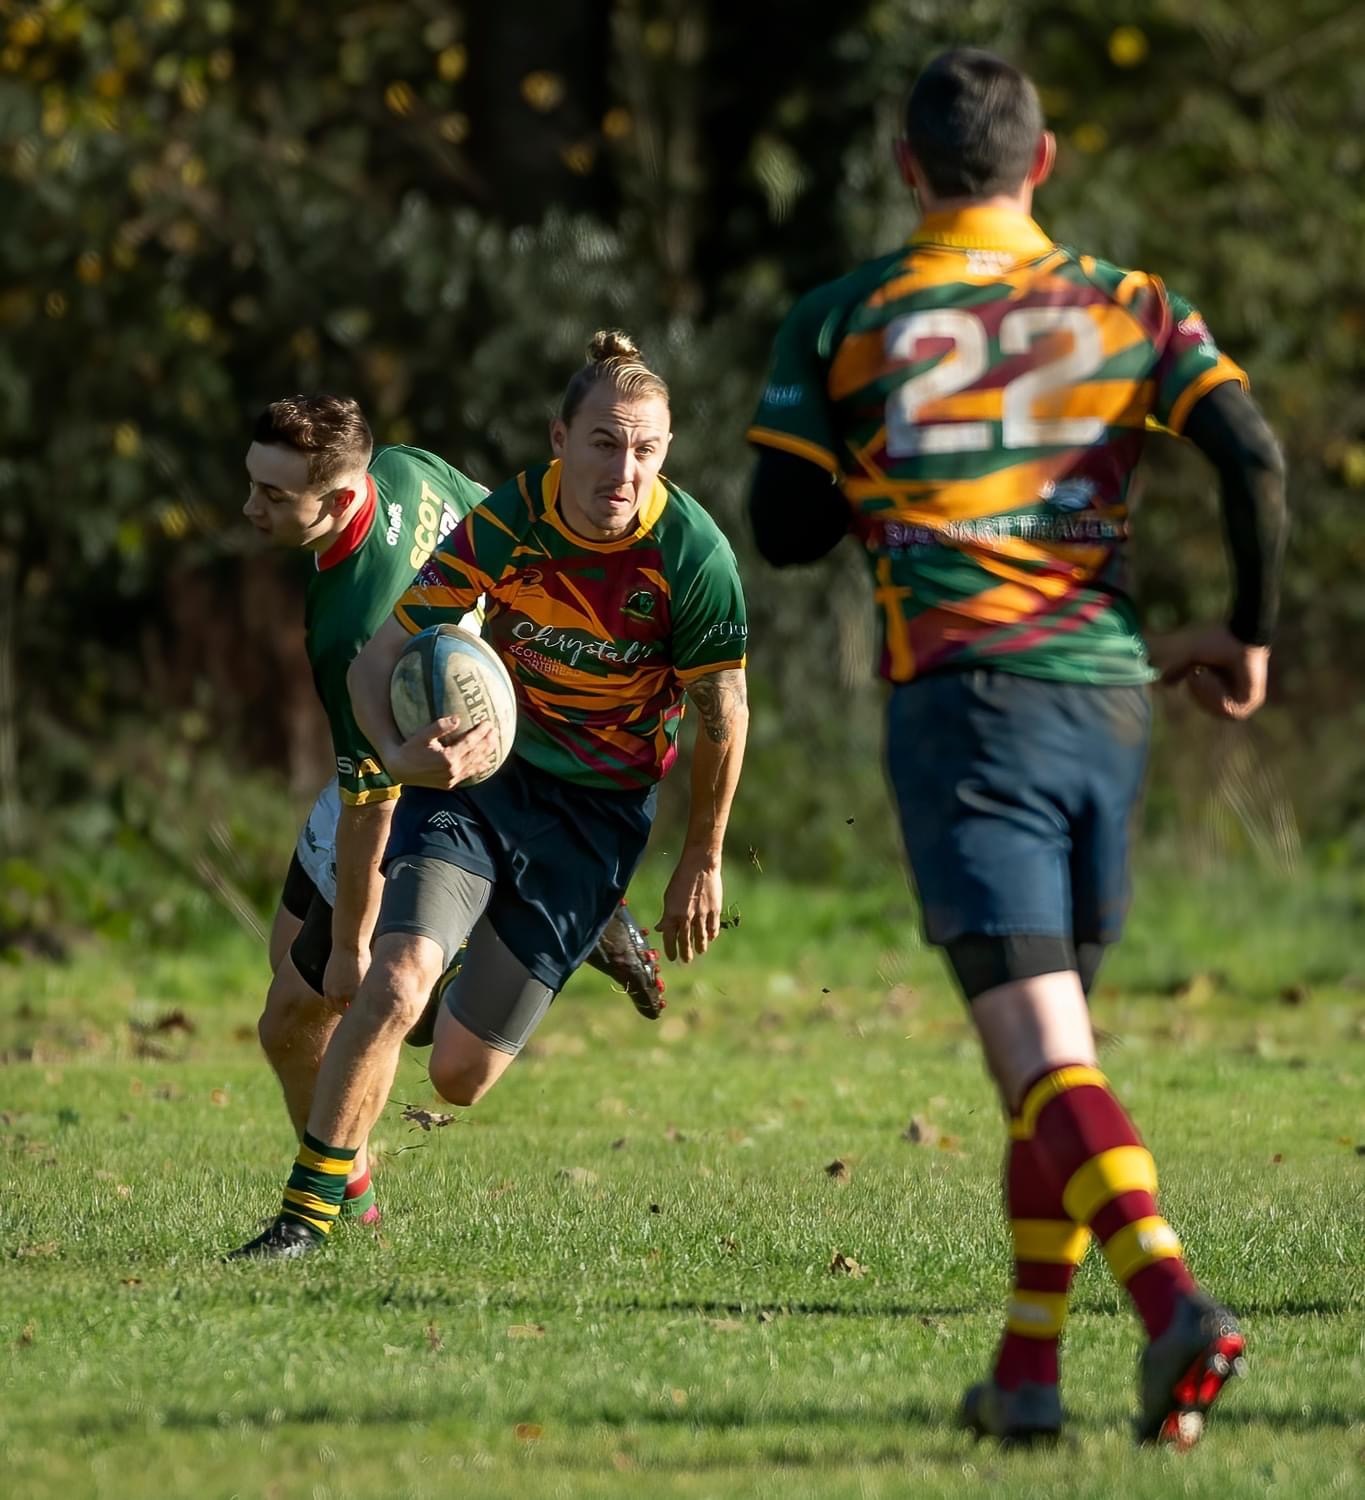 Lomond and Helensburgh mounted a stirring second-half fightback at home to Cambuslang - but had to settle for a losing bonus point after a 26-21 defeat (Image: Guy Phillips/Paisley Colour Photographic Club)